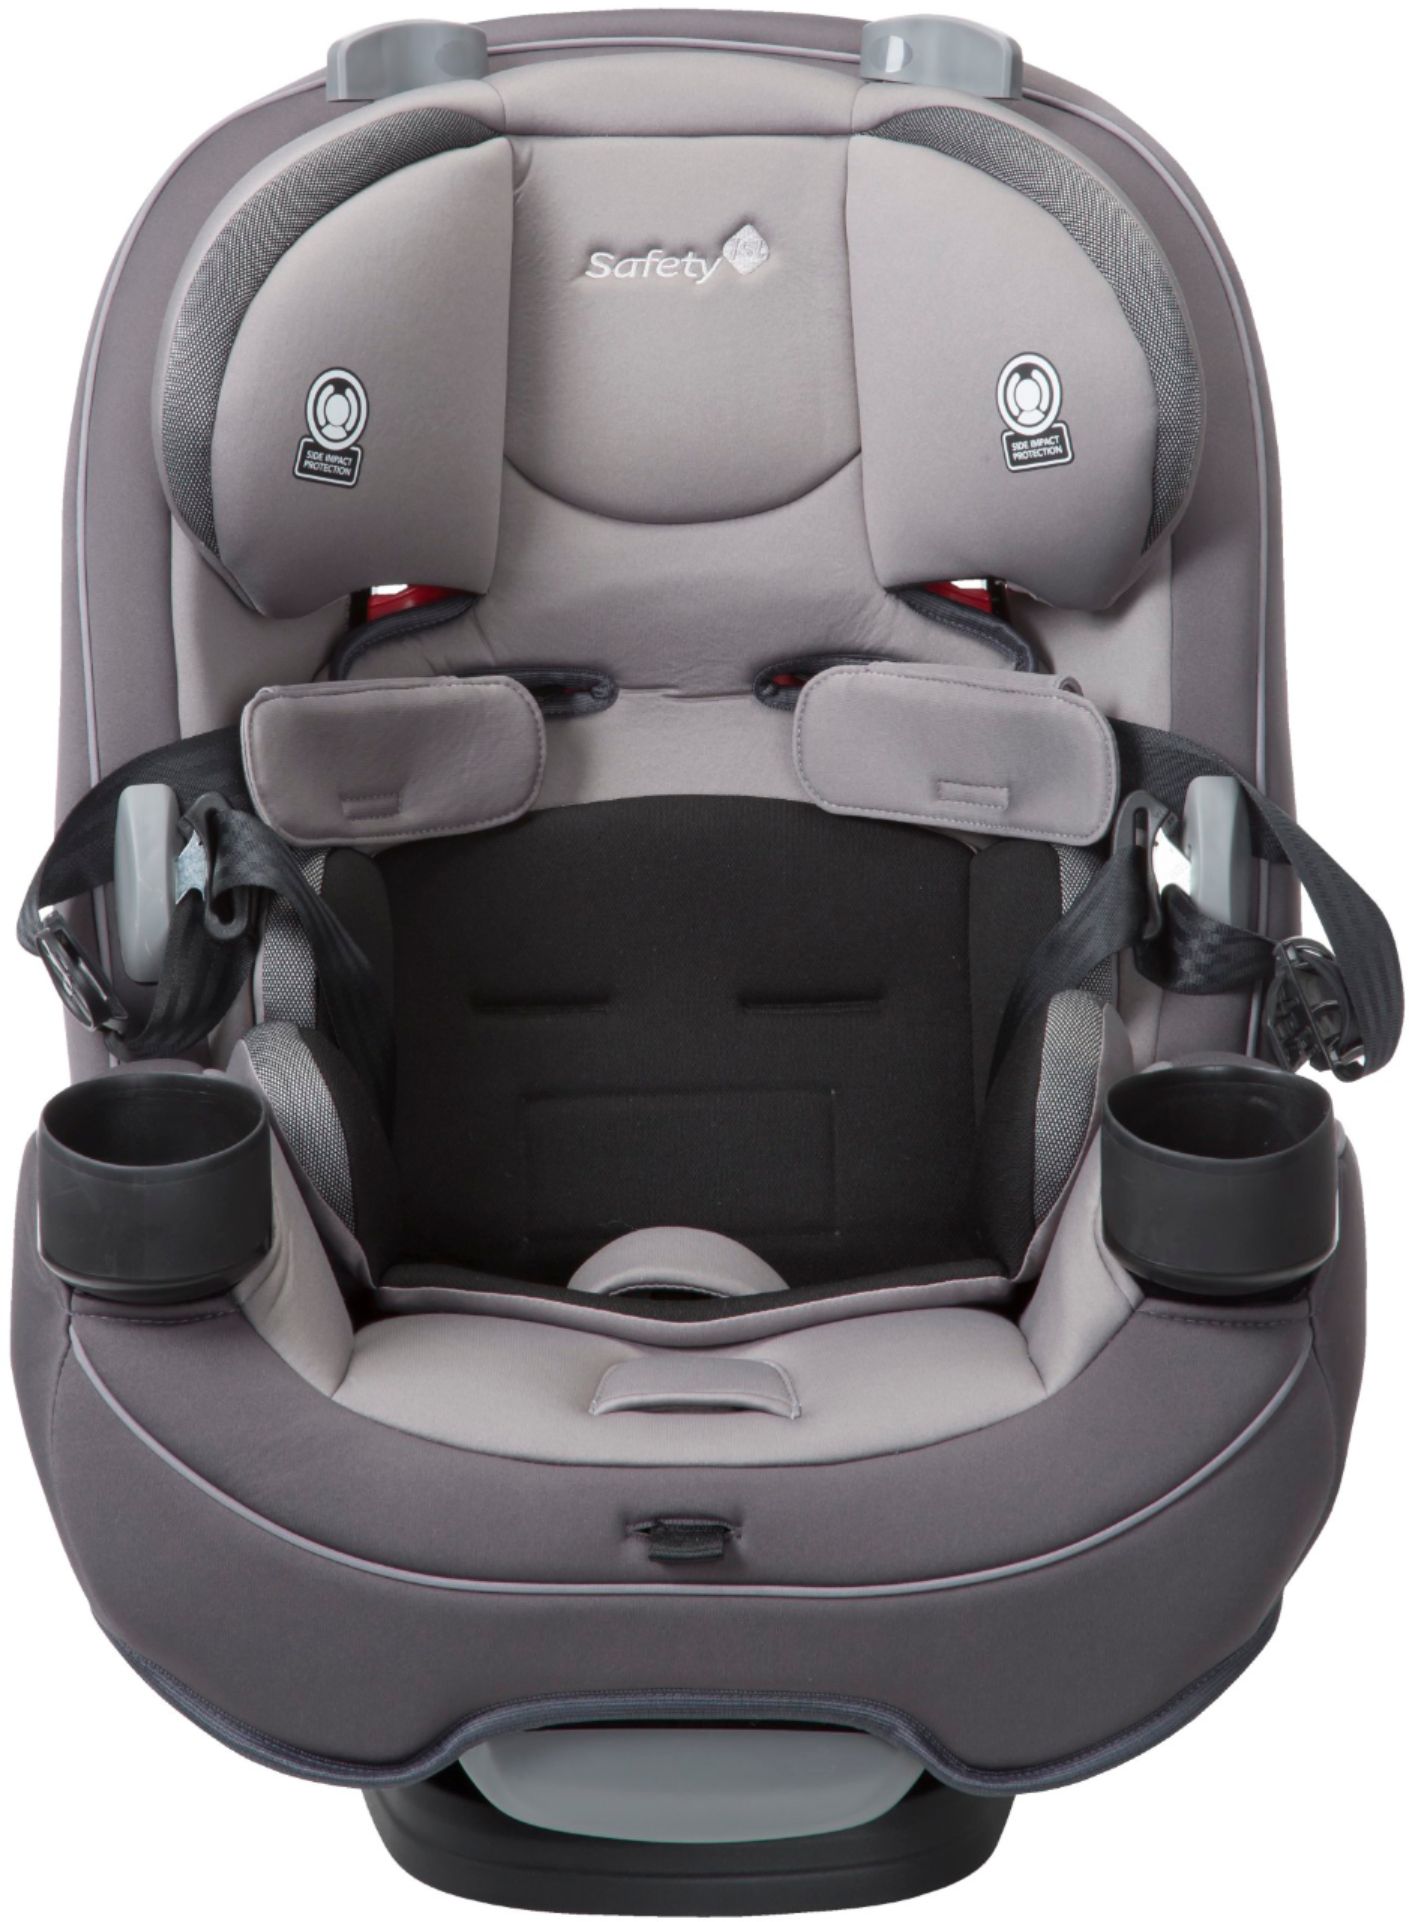 Must-Have Car Accessories: Family Safety & Comfort on Road – Seat